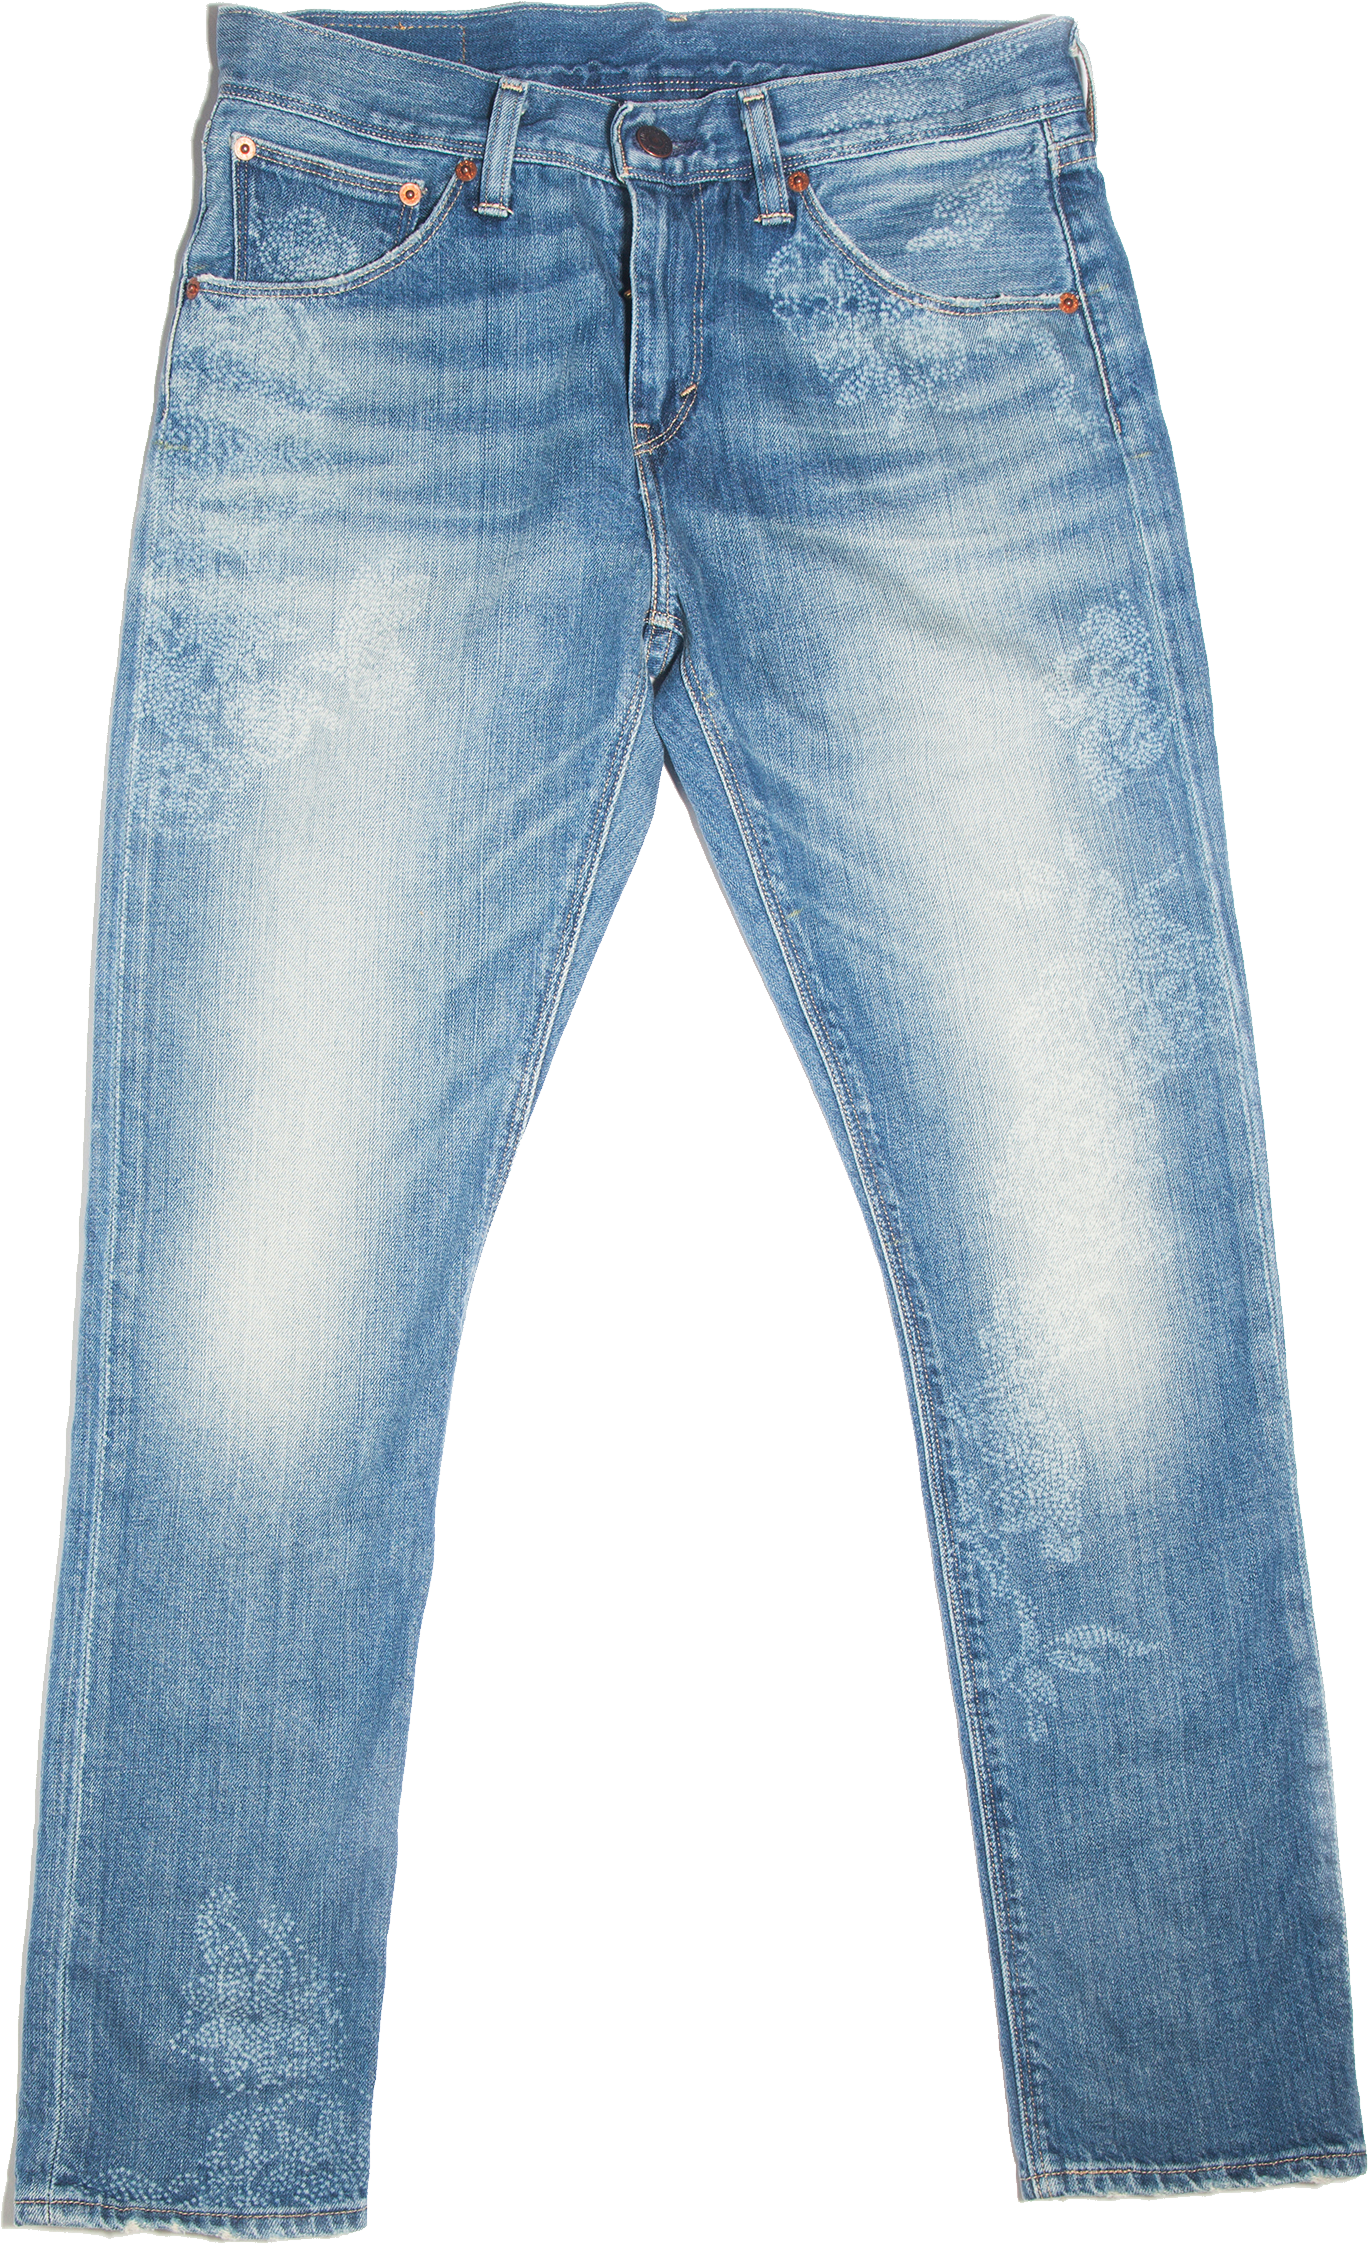 Transparent pencil and in. Clipart shirt jeans